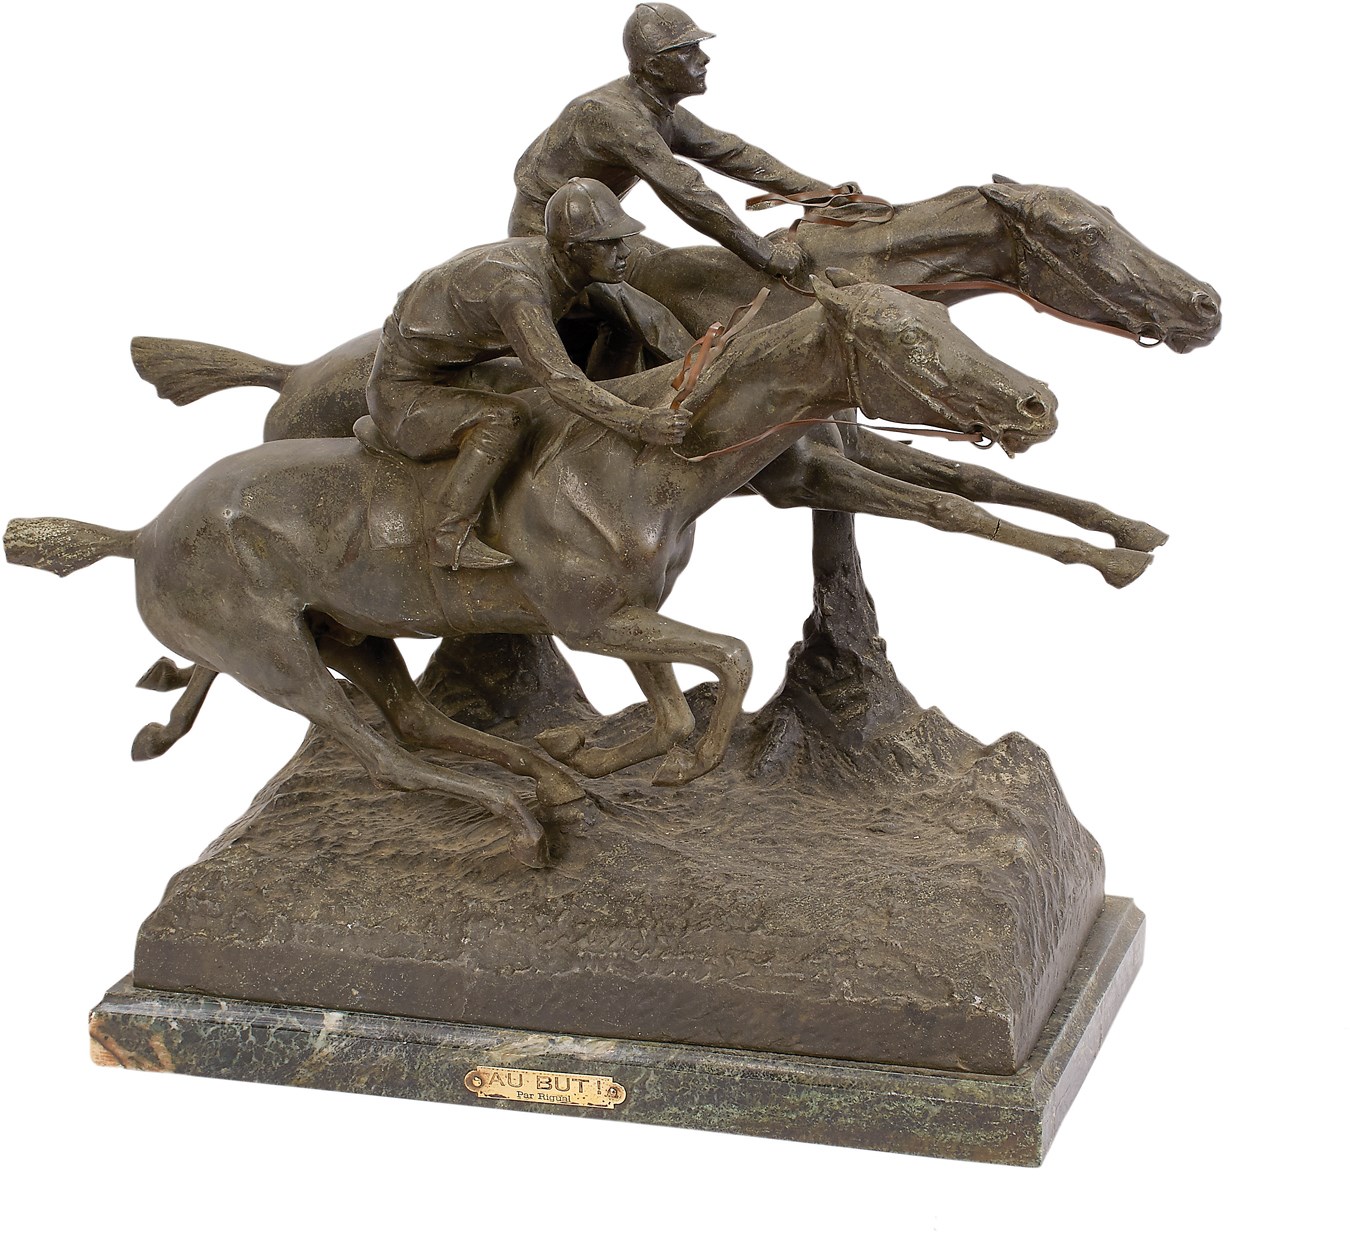 Resplendent 1890s French Horse Racing Statue By Pedro Ramon Jose Rigual